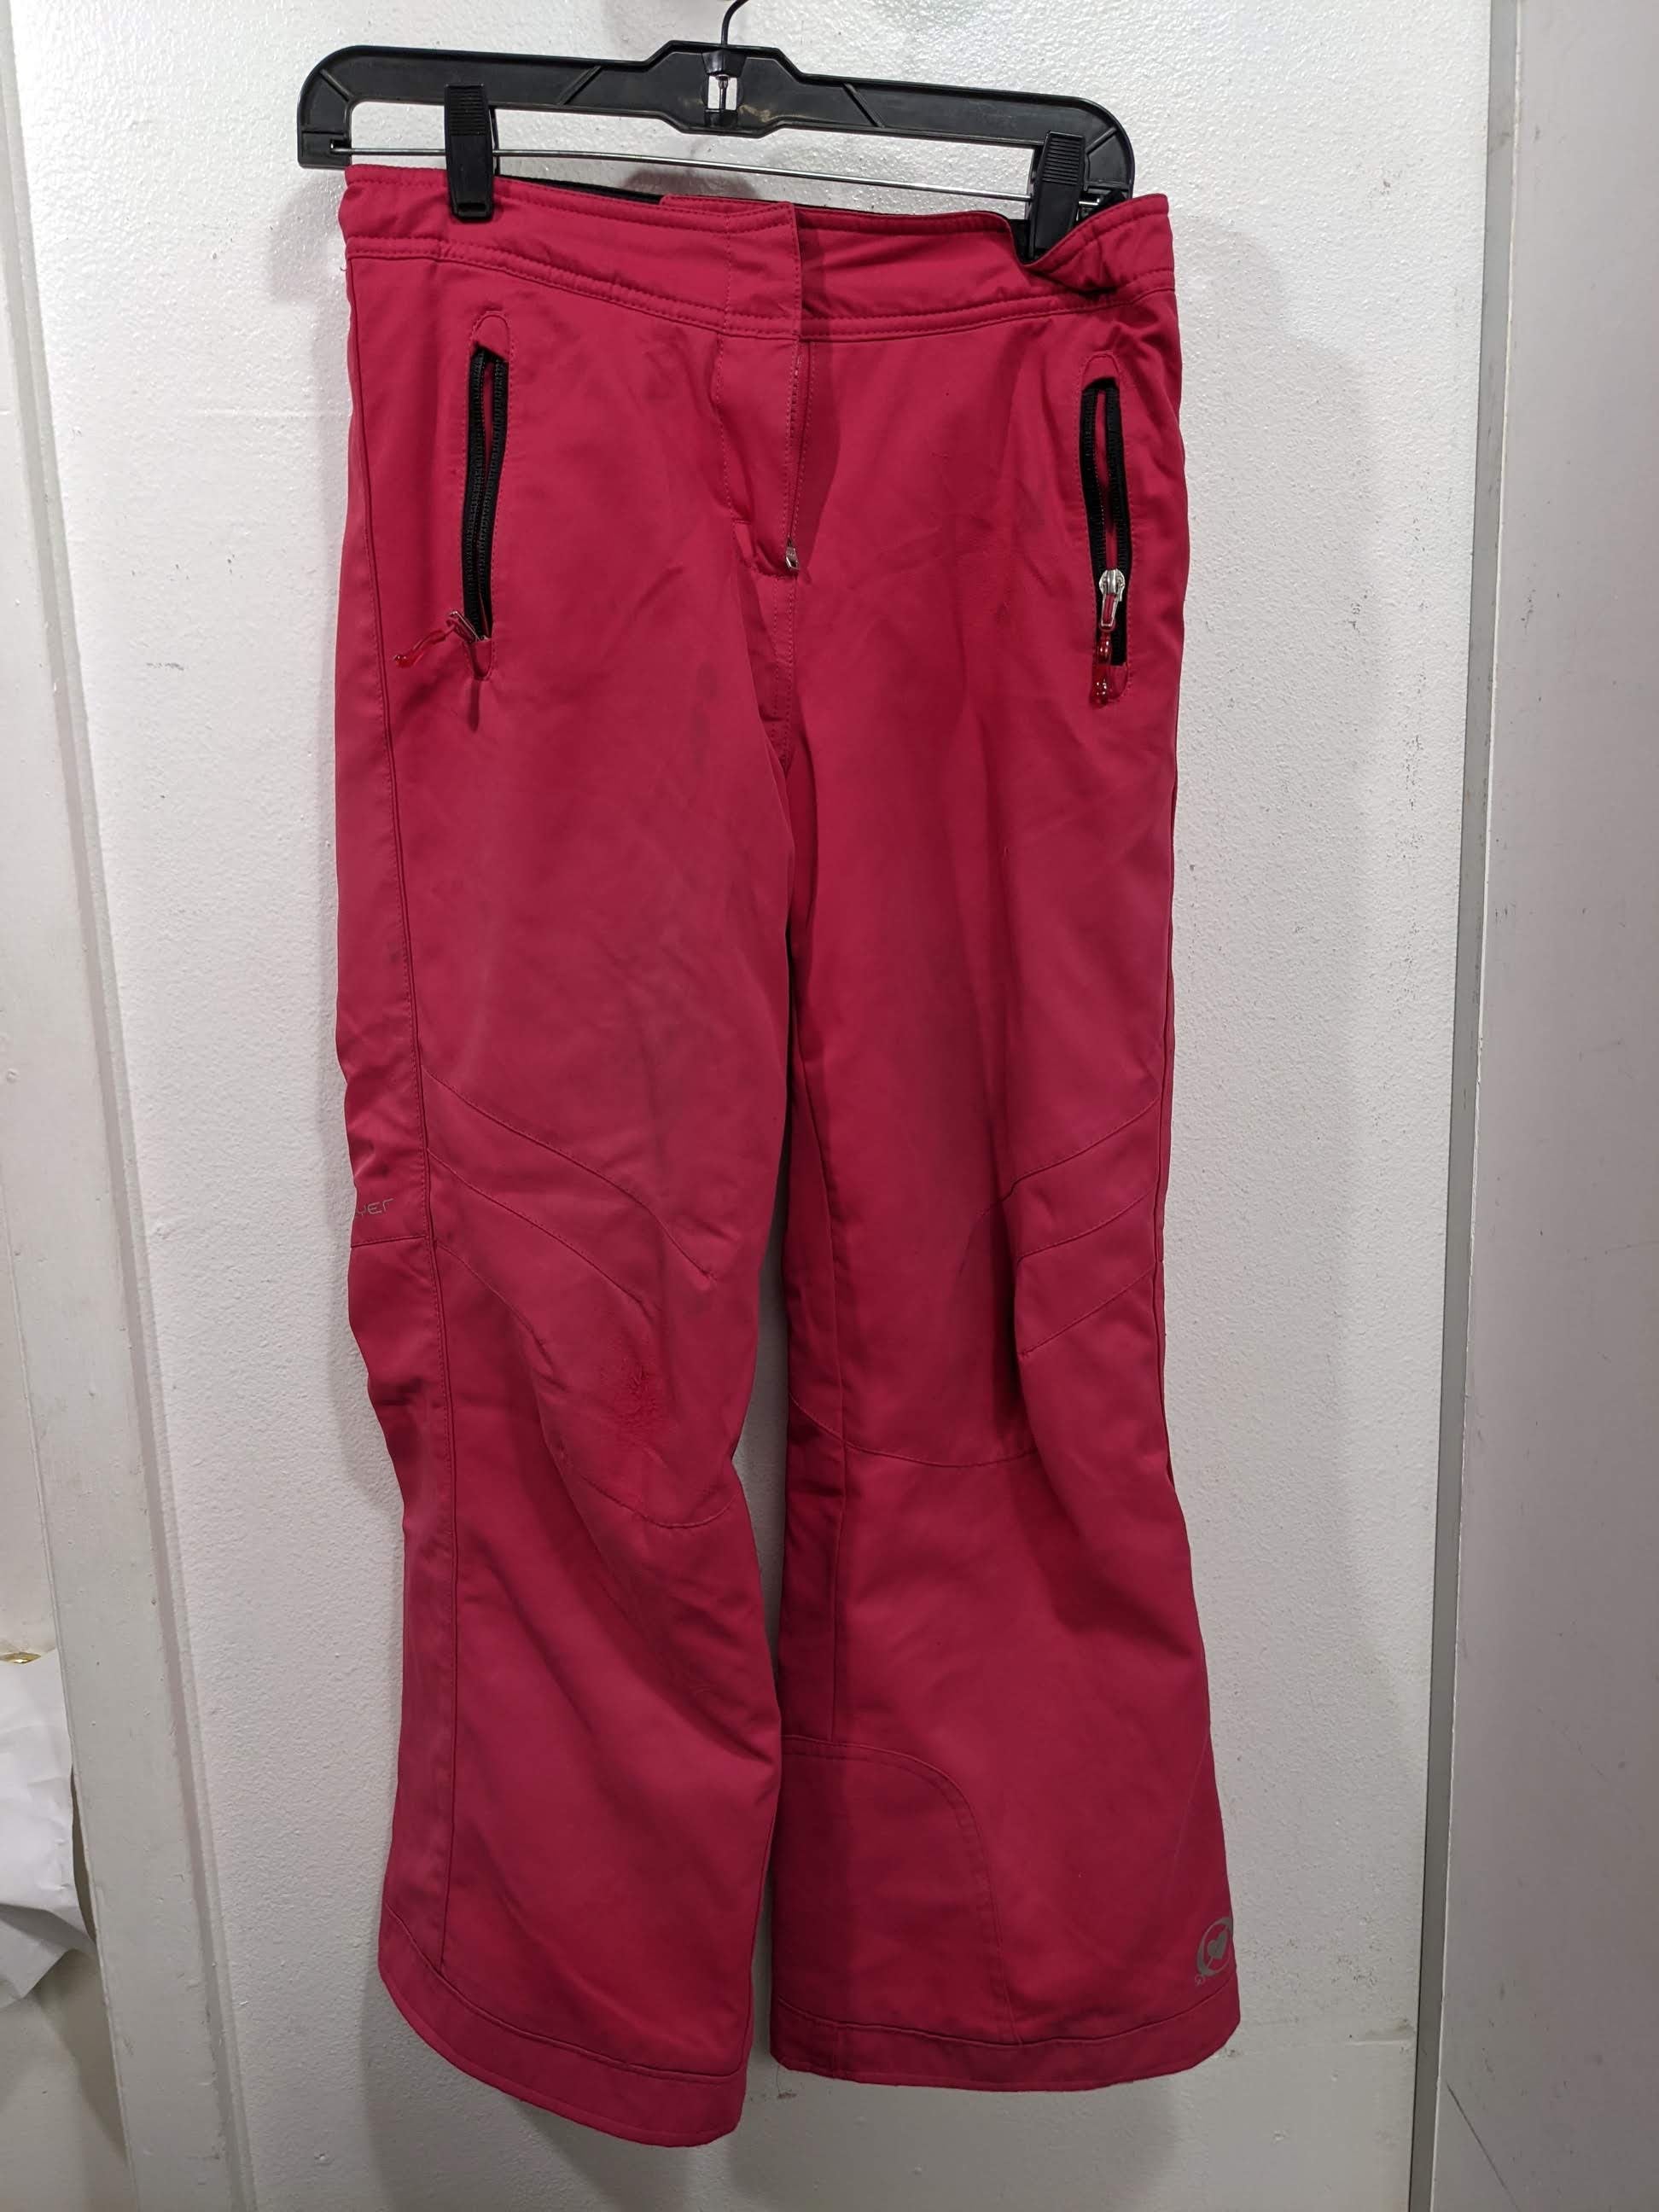 Obermeyer EWS Youth Ski/Board Pants Size 12 Youth Large Pink Used Coat –  Replays Sports Exchange